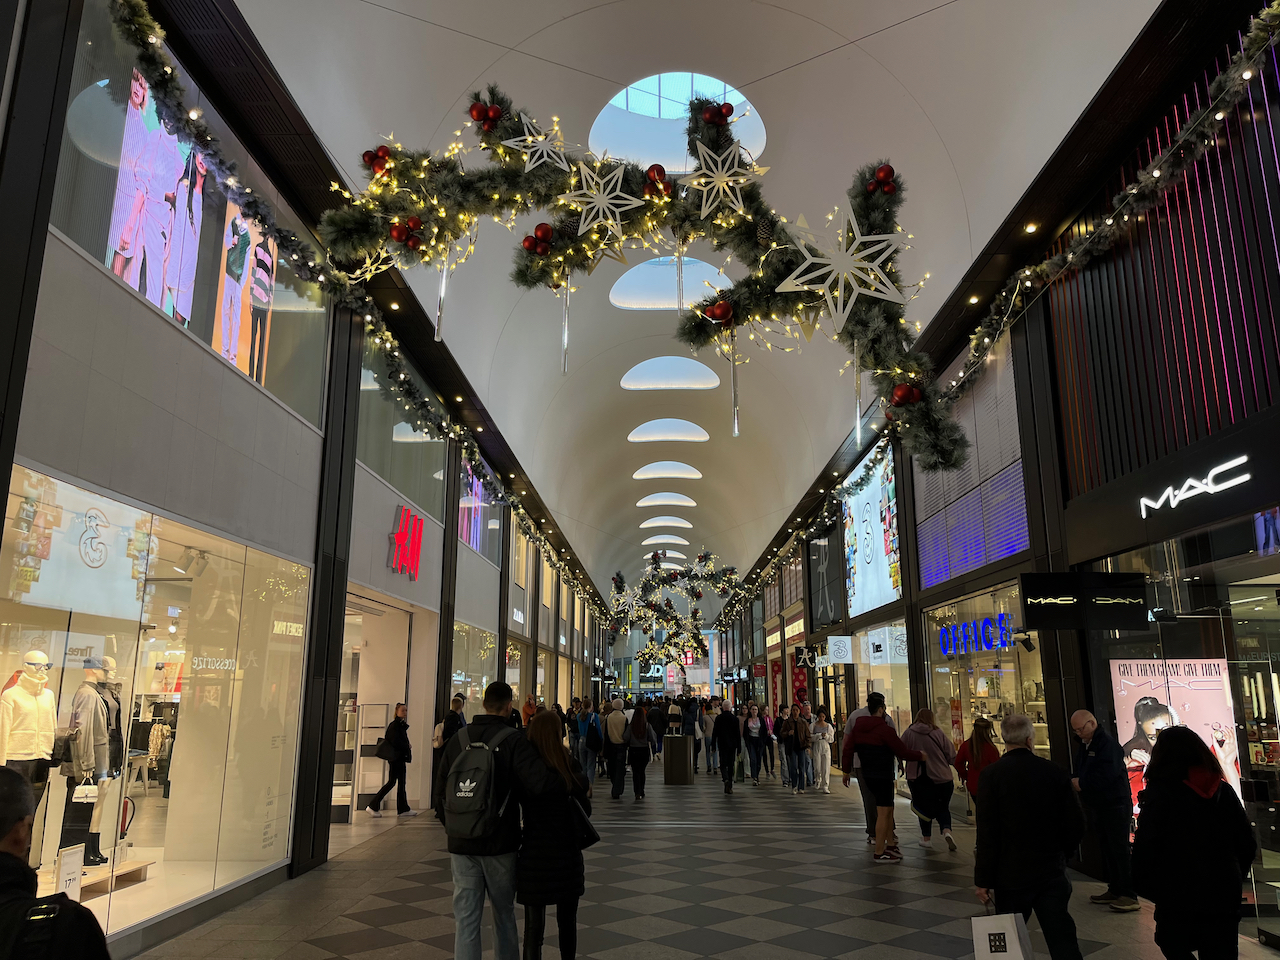 Christmas decorations hanging from the ceiling in a corridor of Westgate shopping centre, consisting of large branch-like shapes covered in greenery and lights, while more lights and tinsel are strung high along each wall of the corridor above the shop entrances.